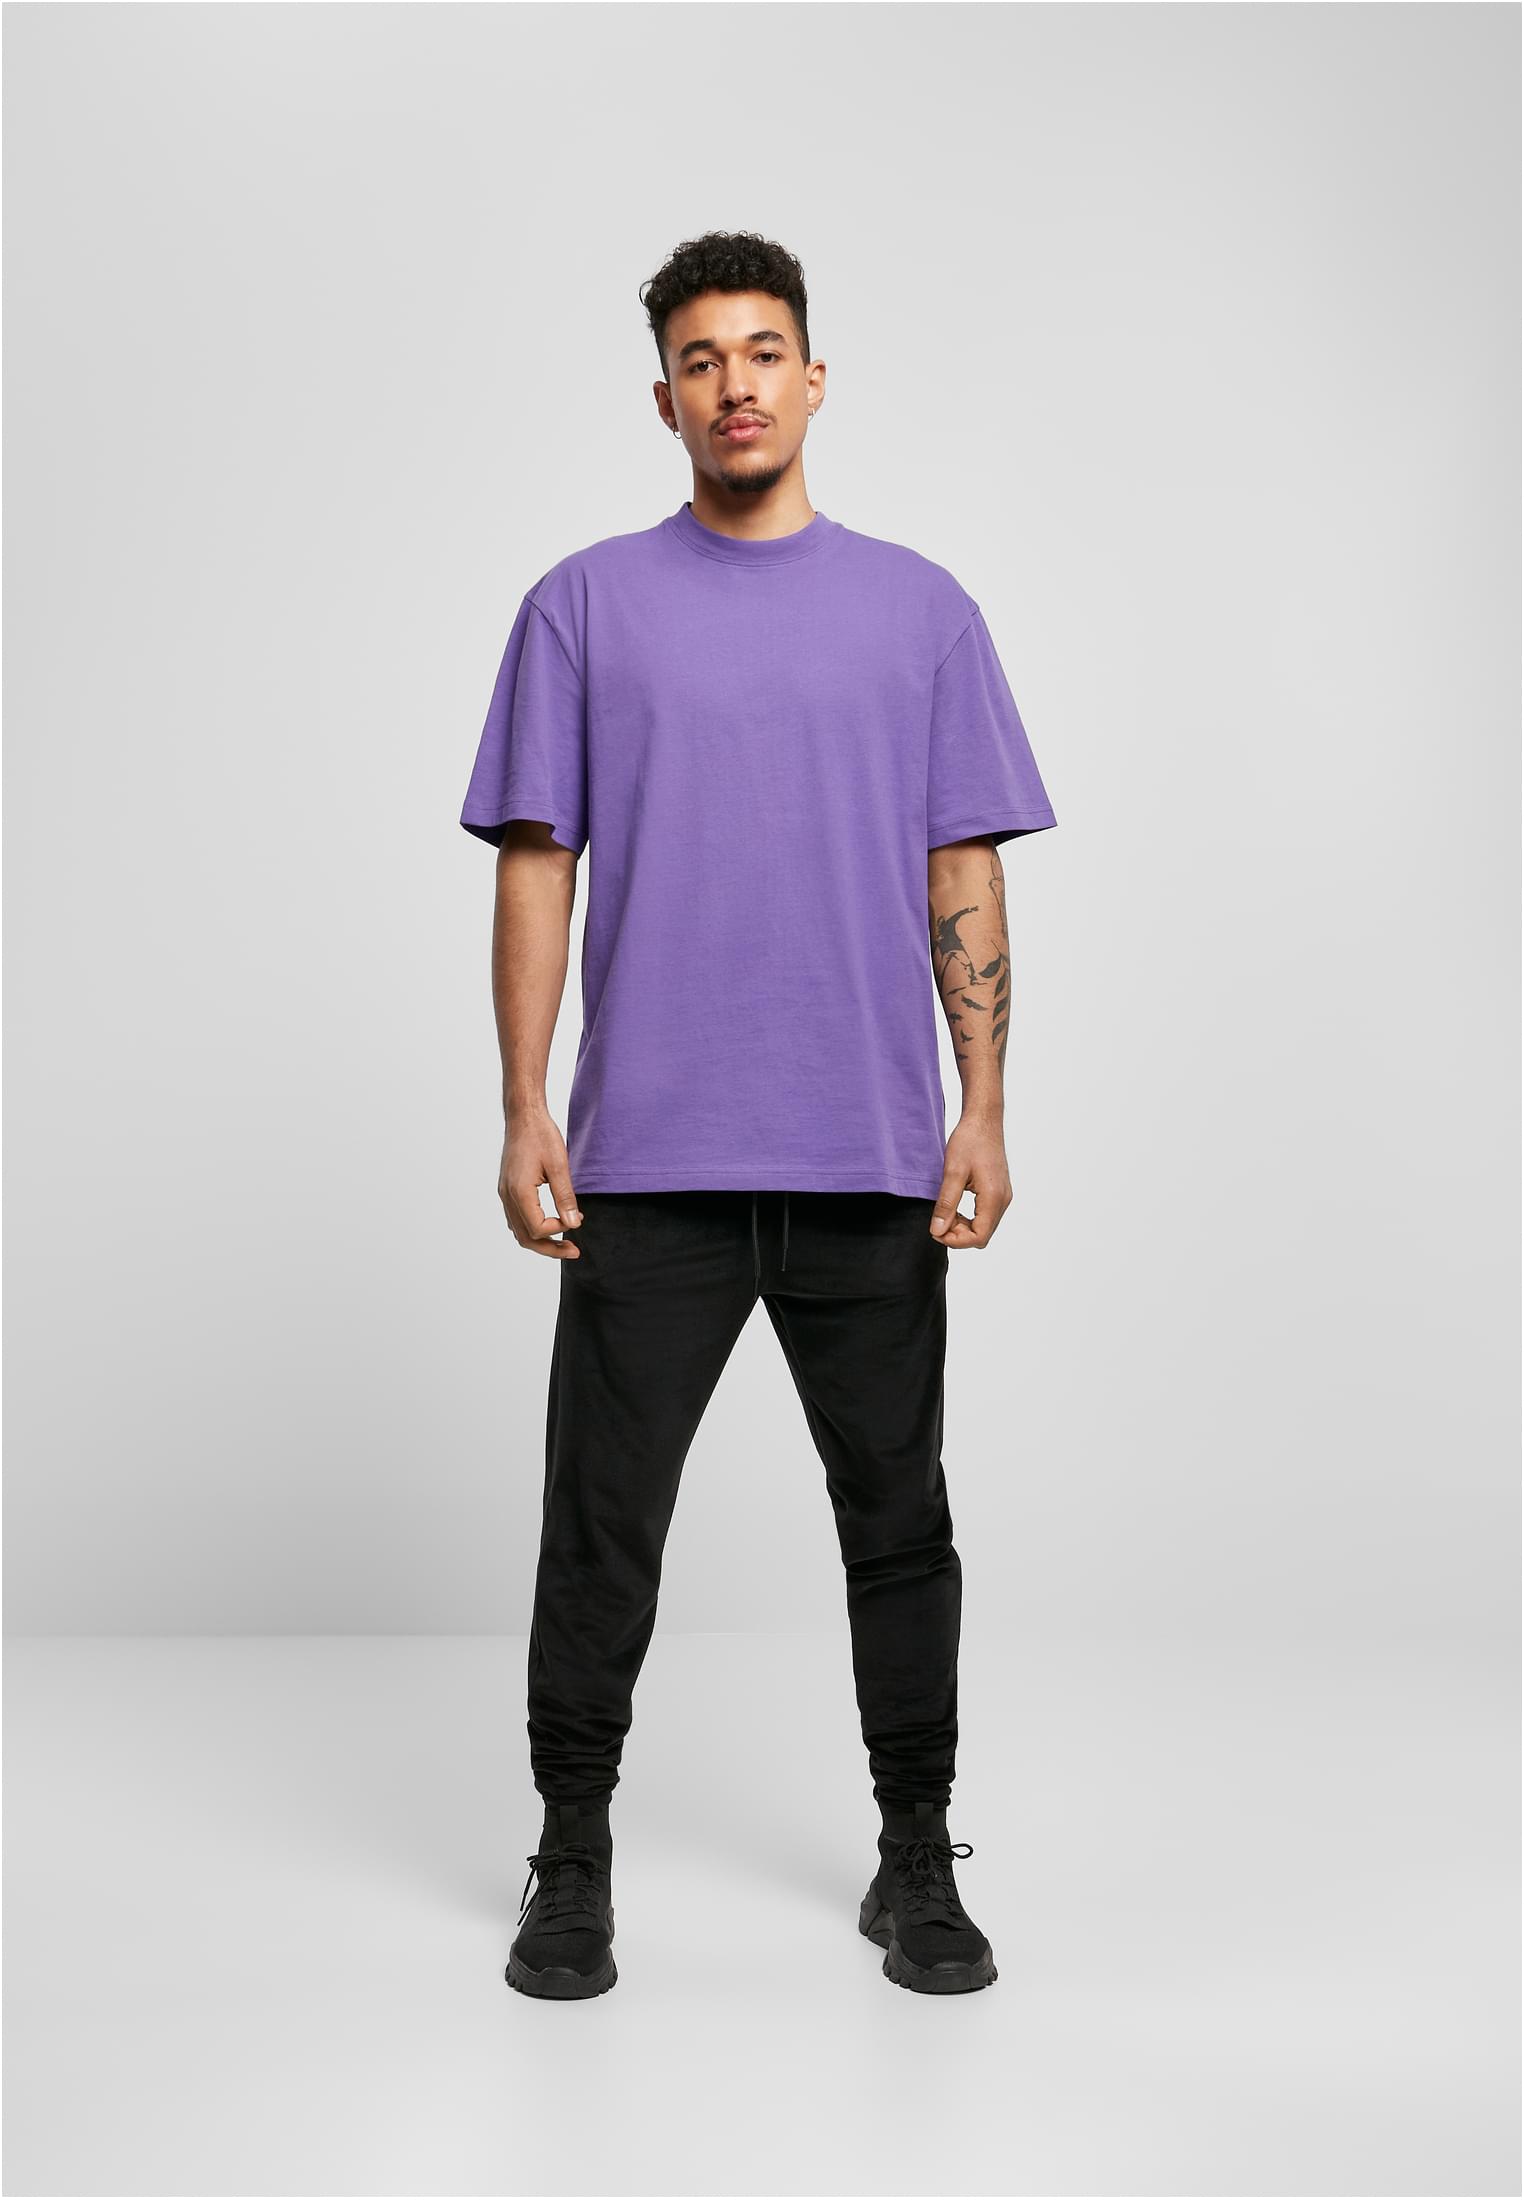 Plus Size Tall Tee in Farbe ultraviolet